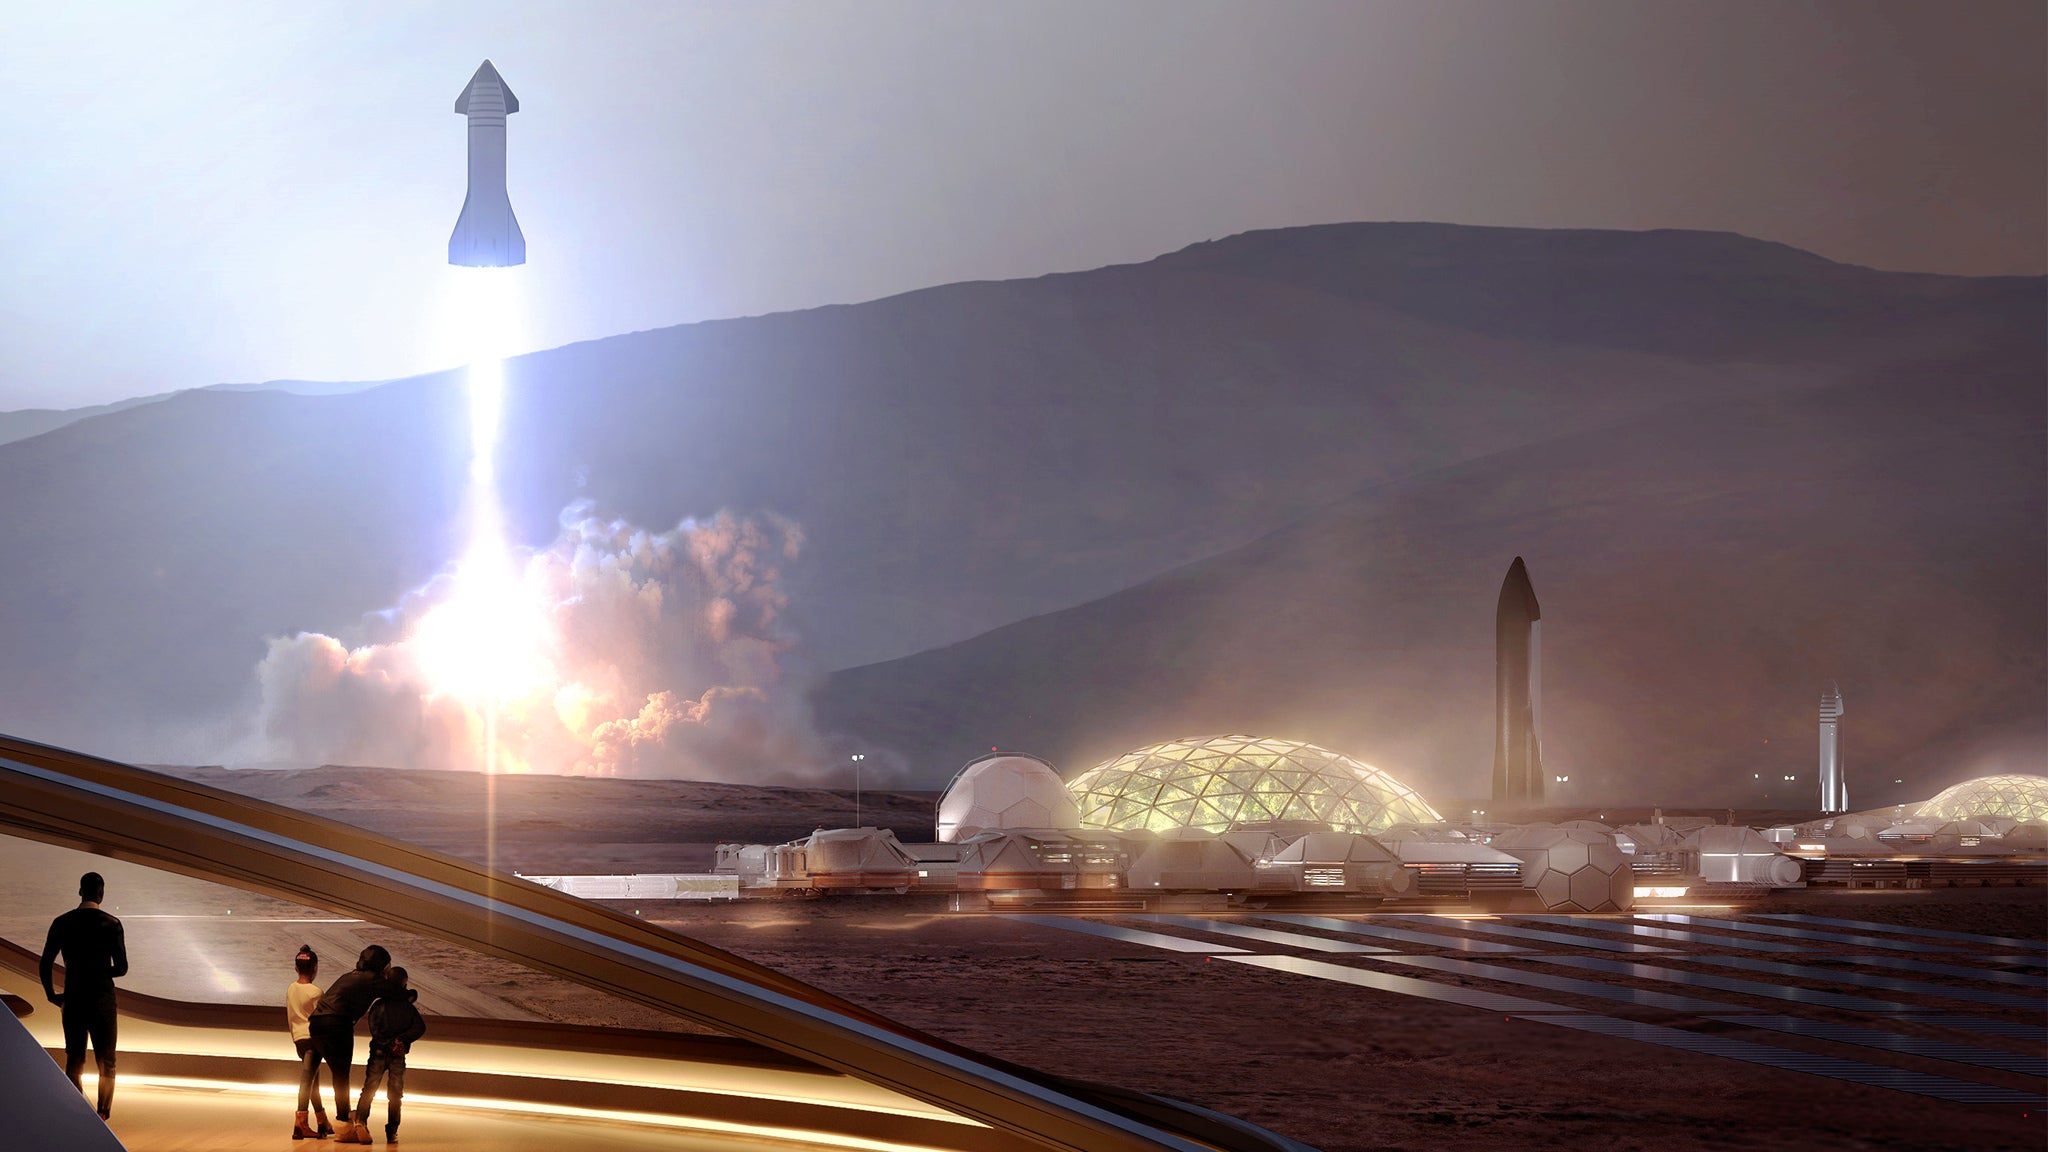 Starlink Is Key To Funding SpaceX’s Starship Fleet To Colonize Mars